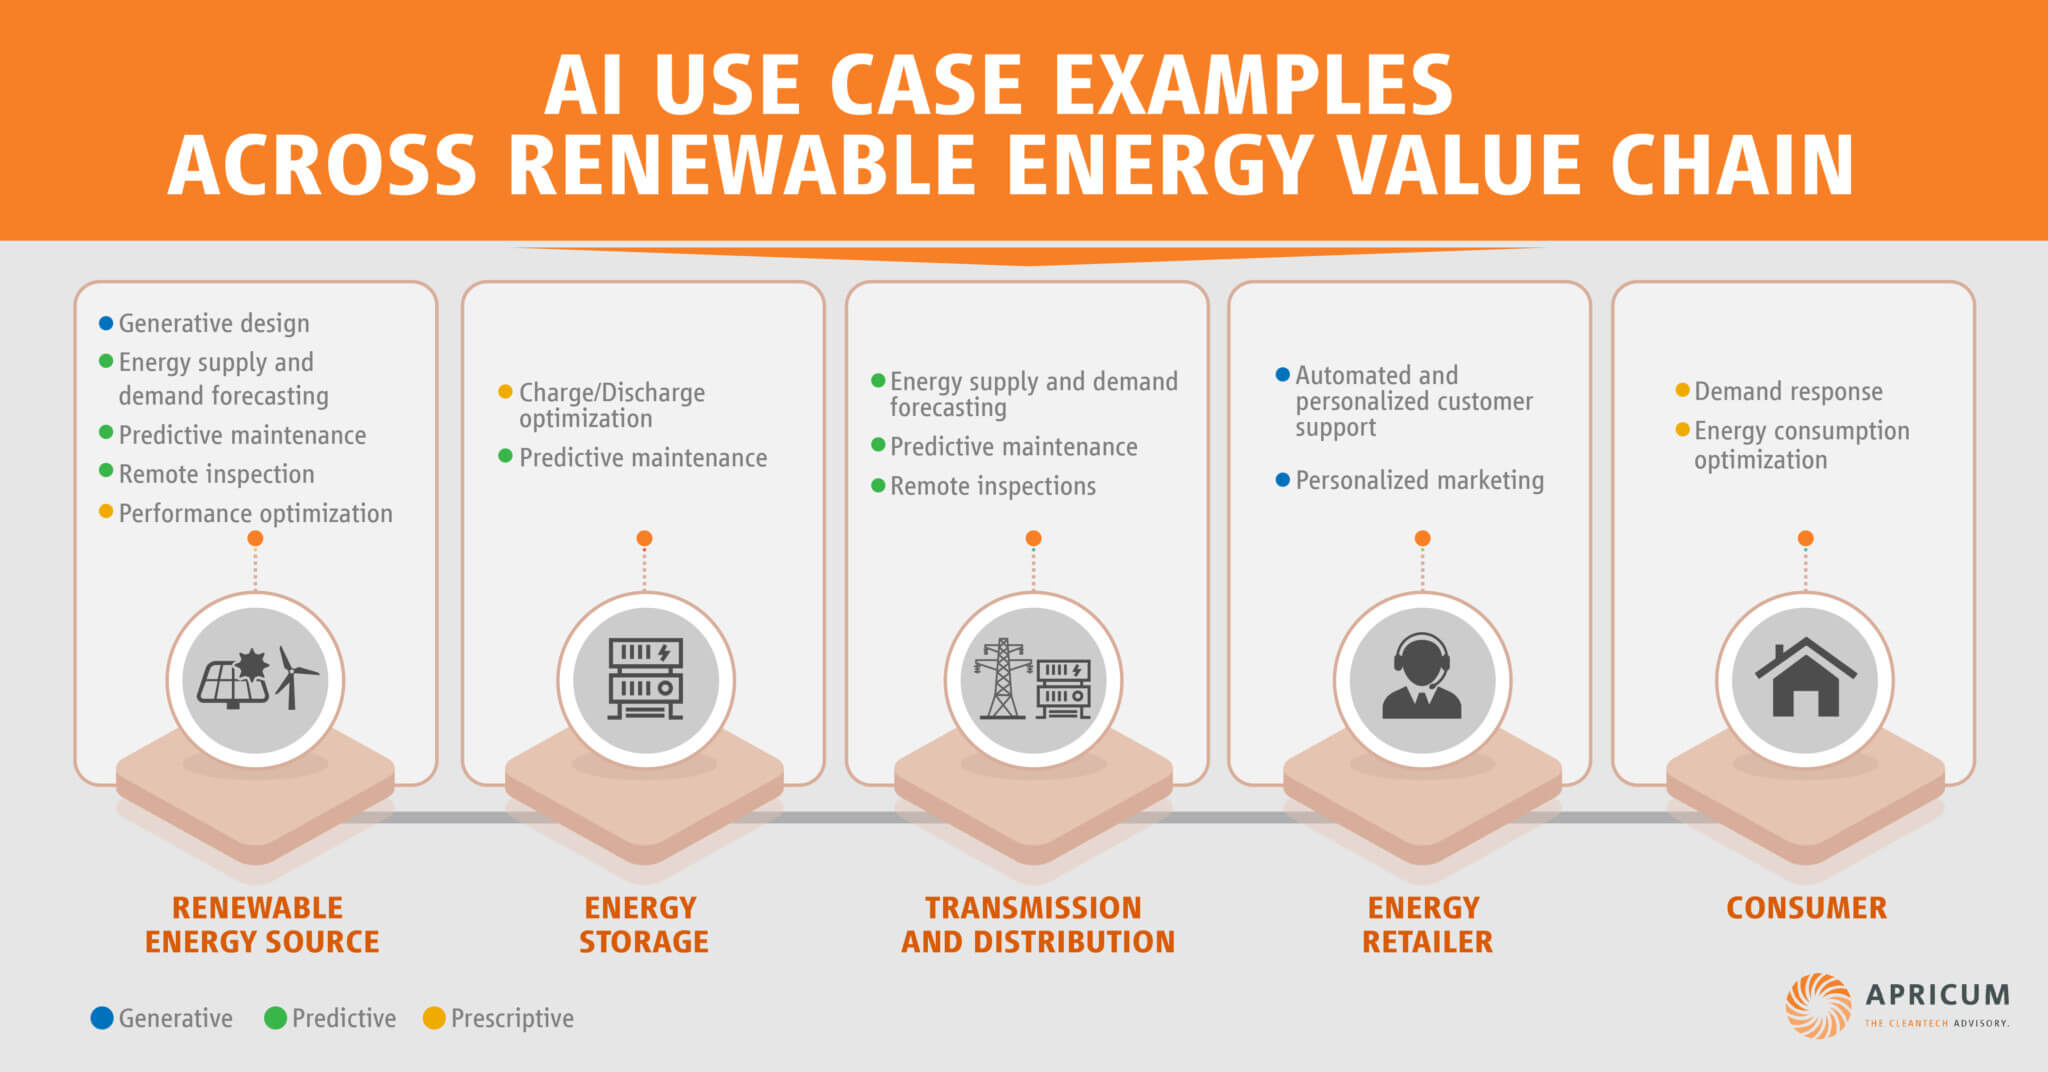 AI use cases across the renewable energy value chain